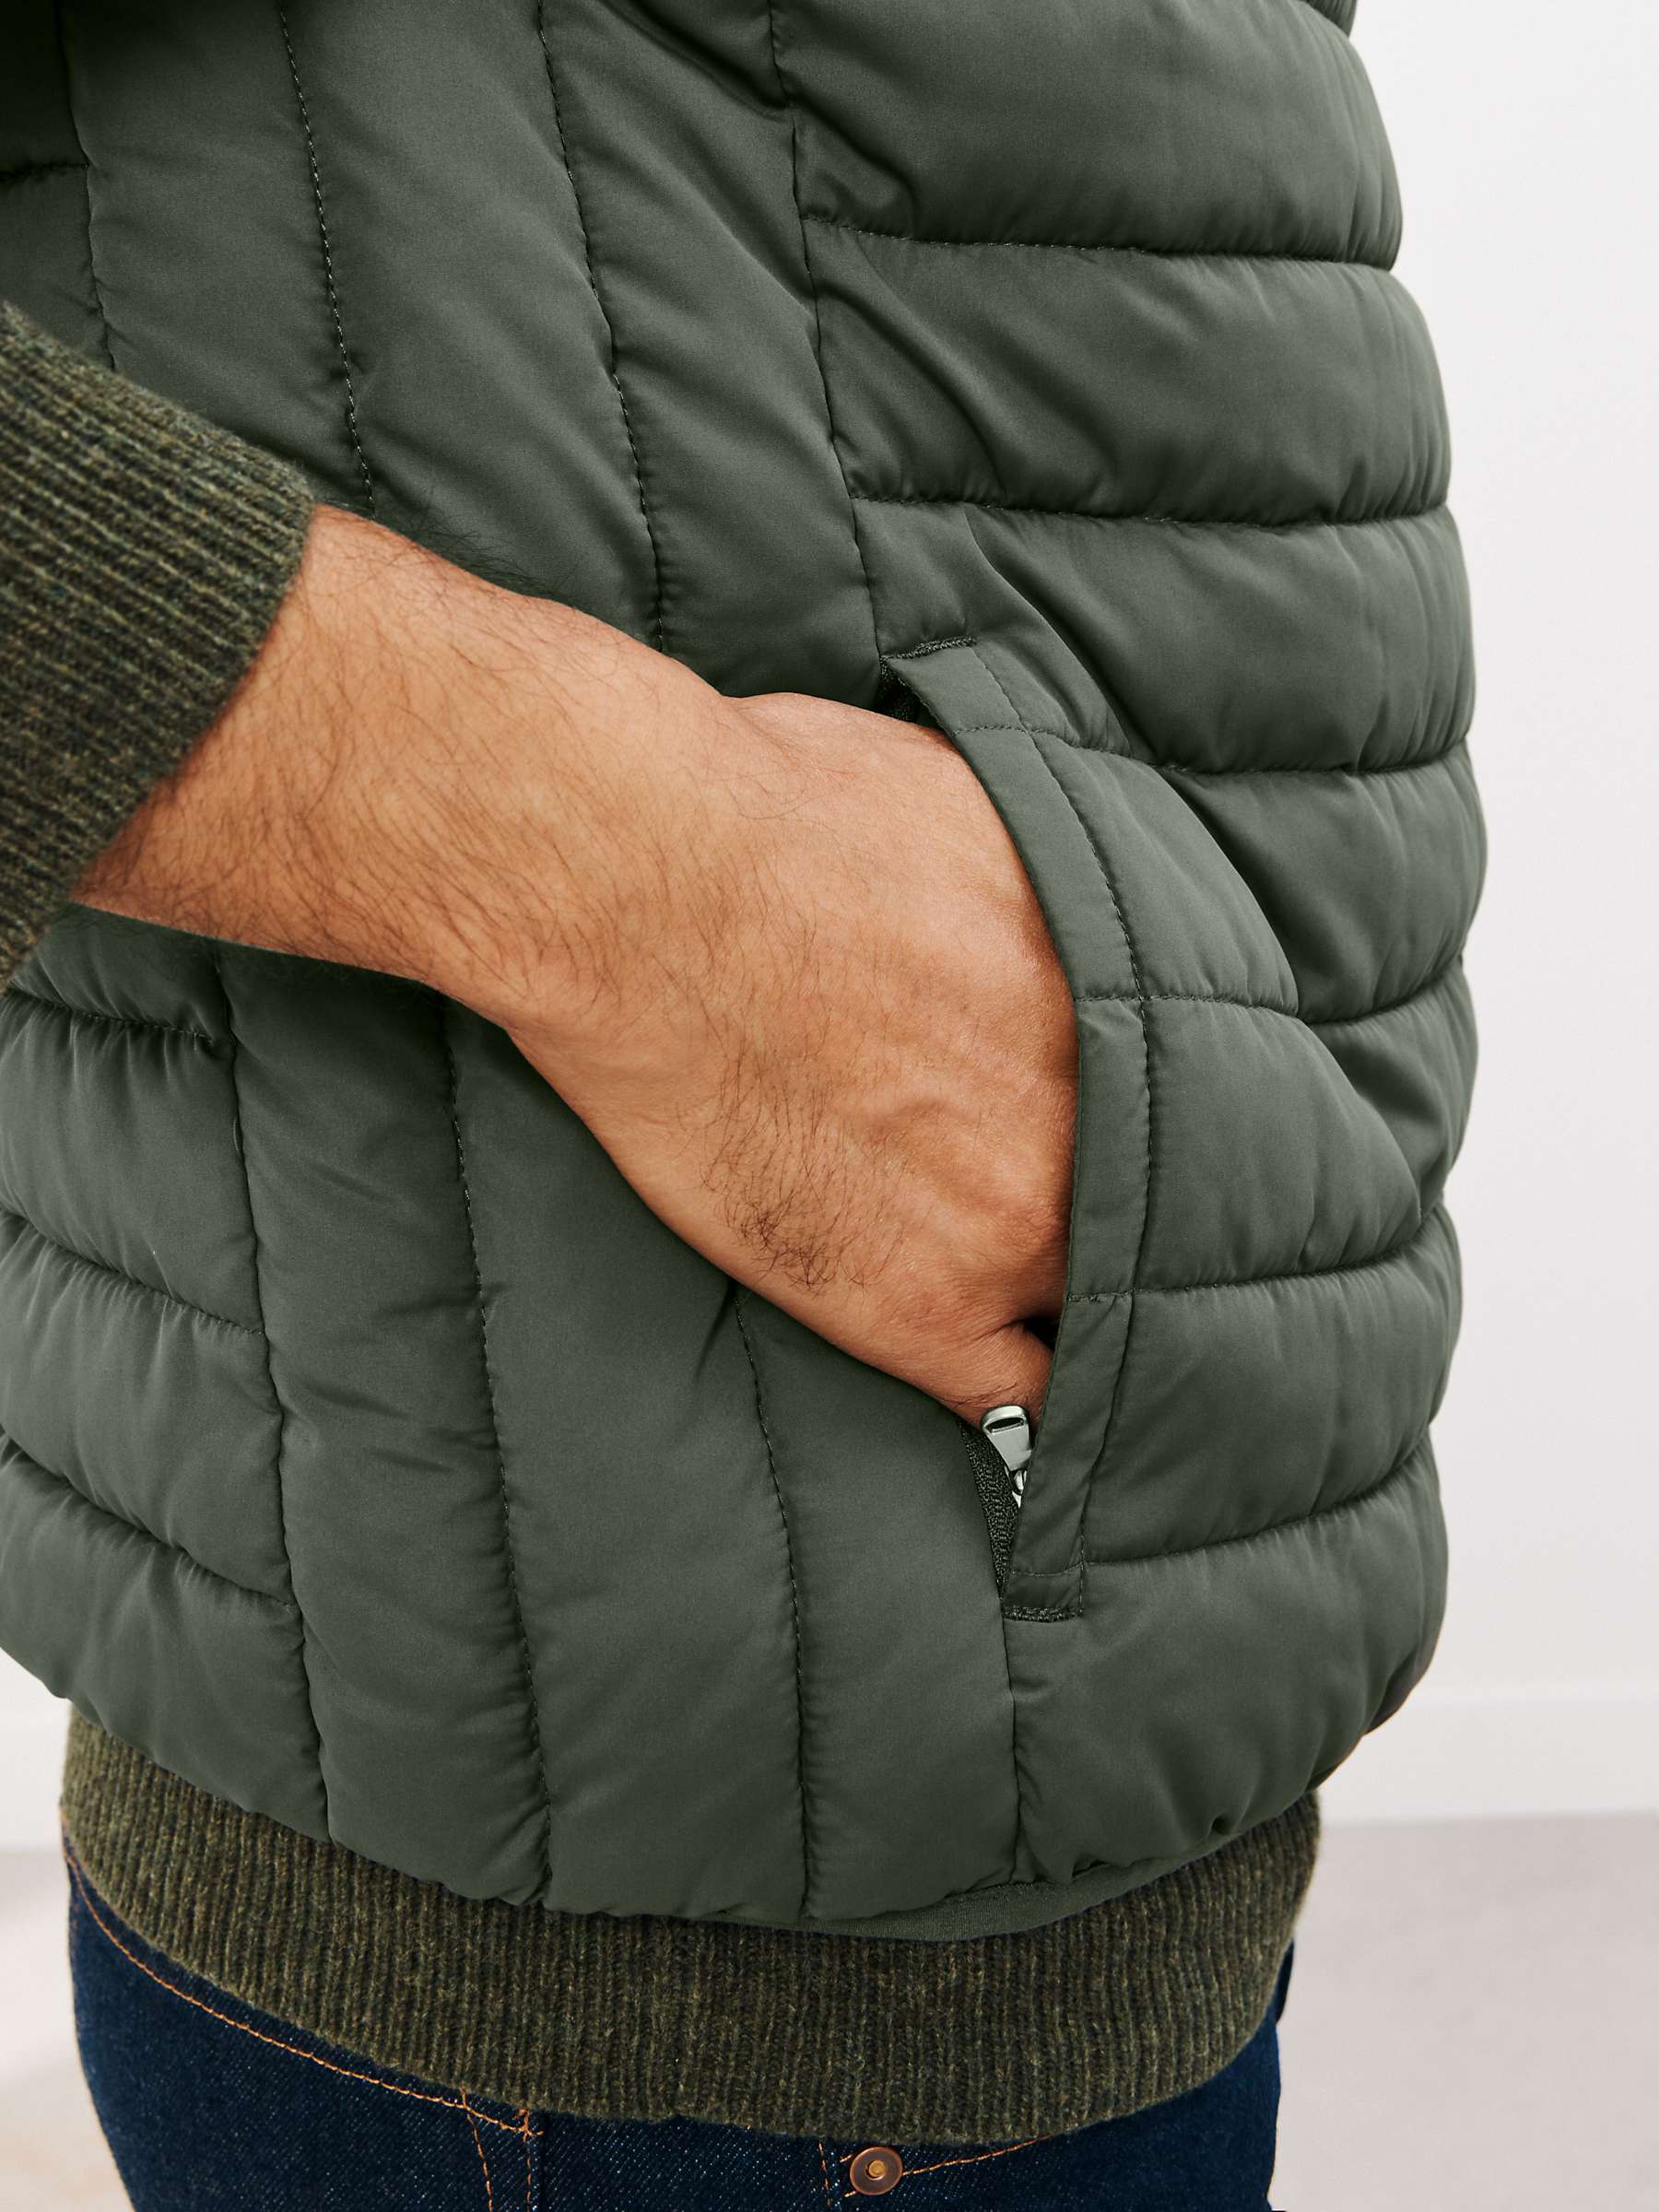 Buy John Lewis Shower Resistant Recycled Puffer Gilet Online at johnlewis.com